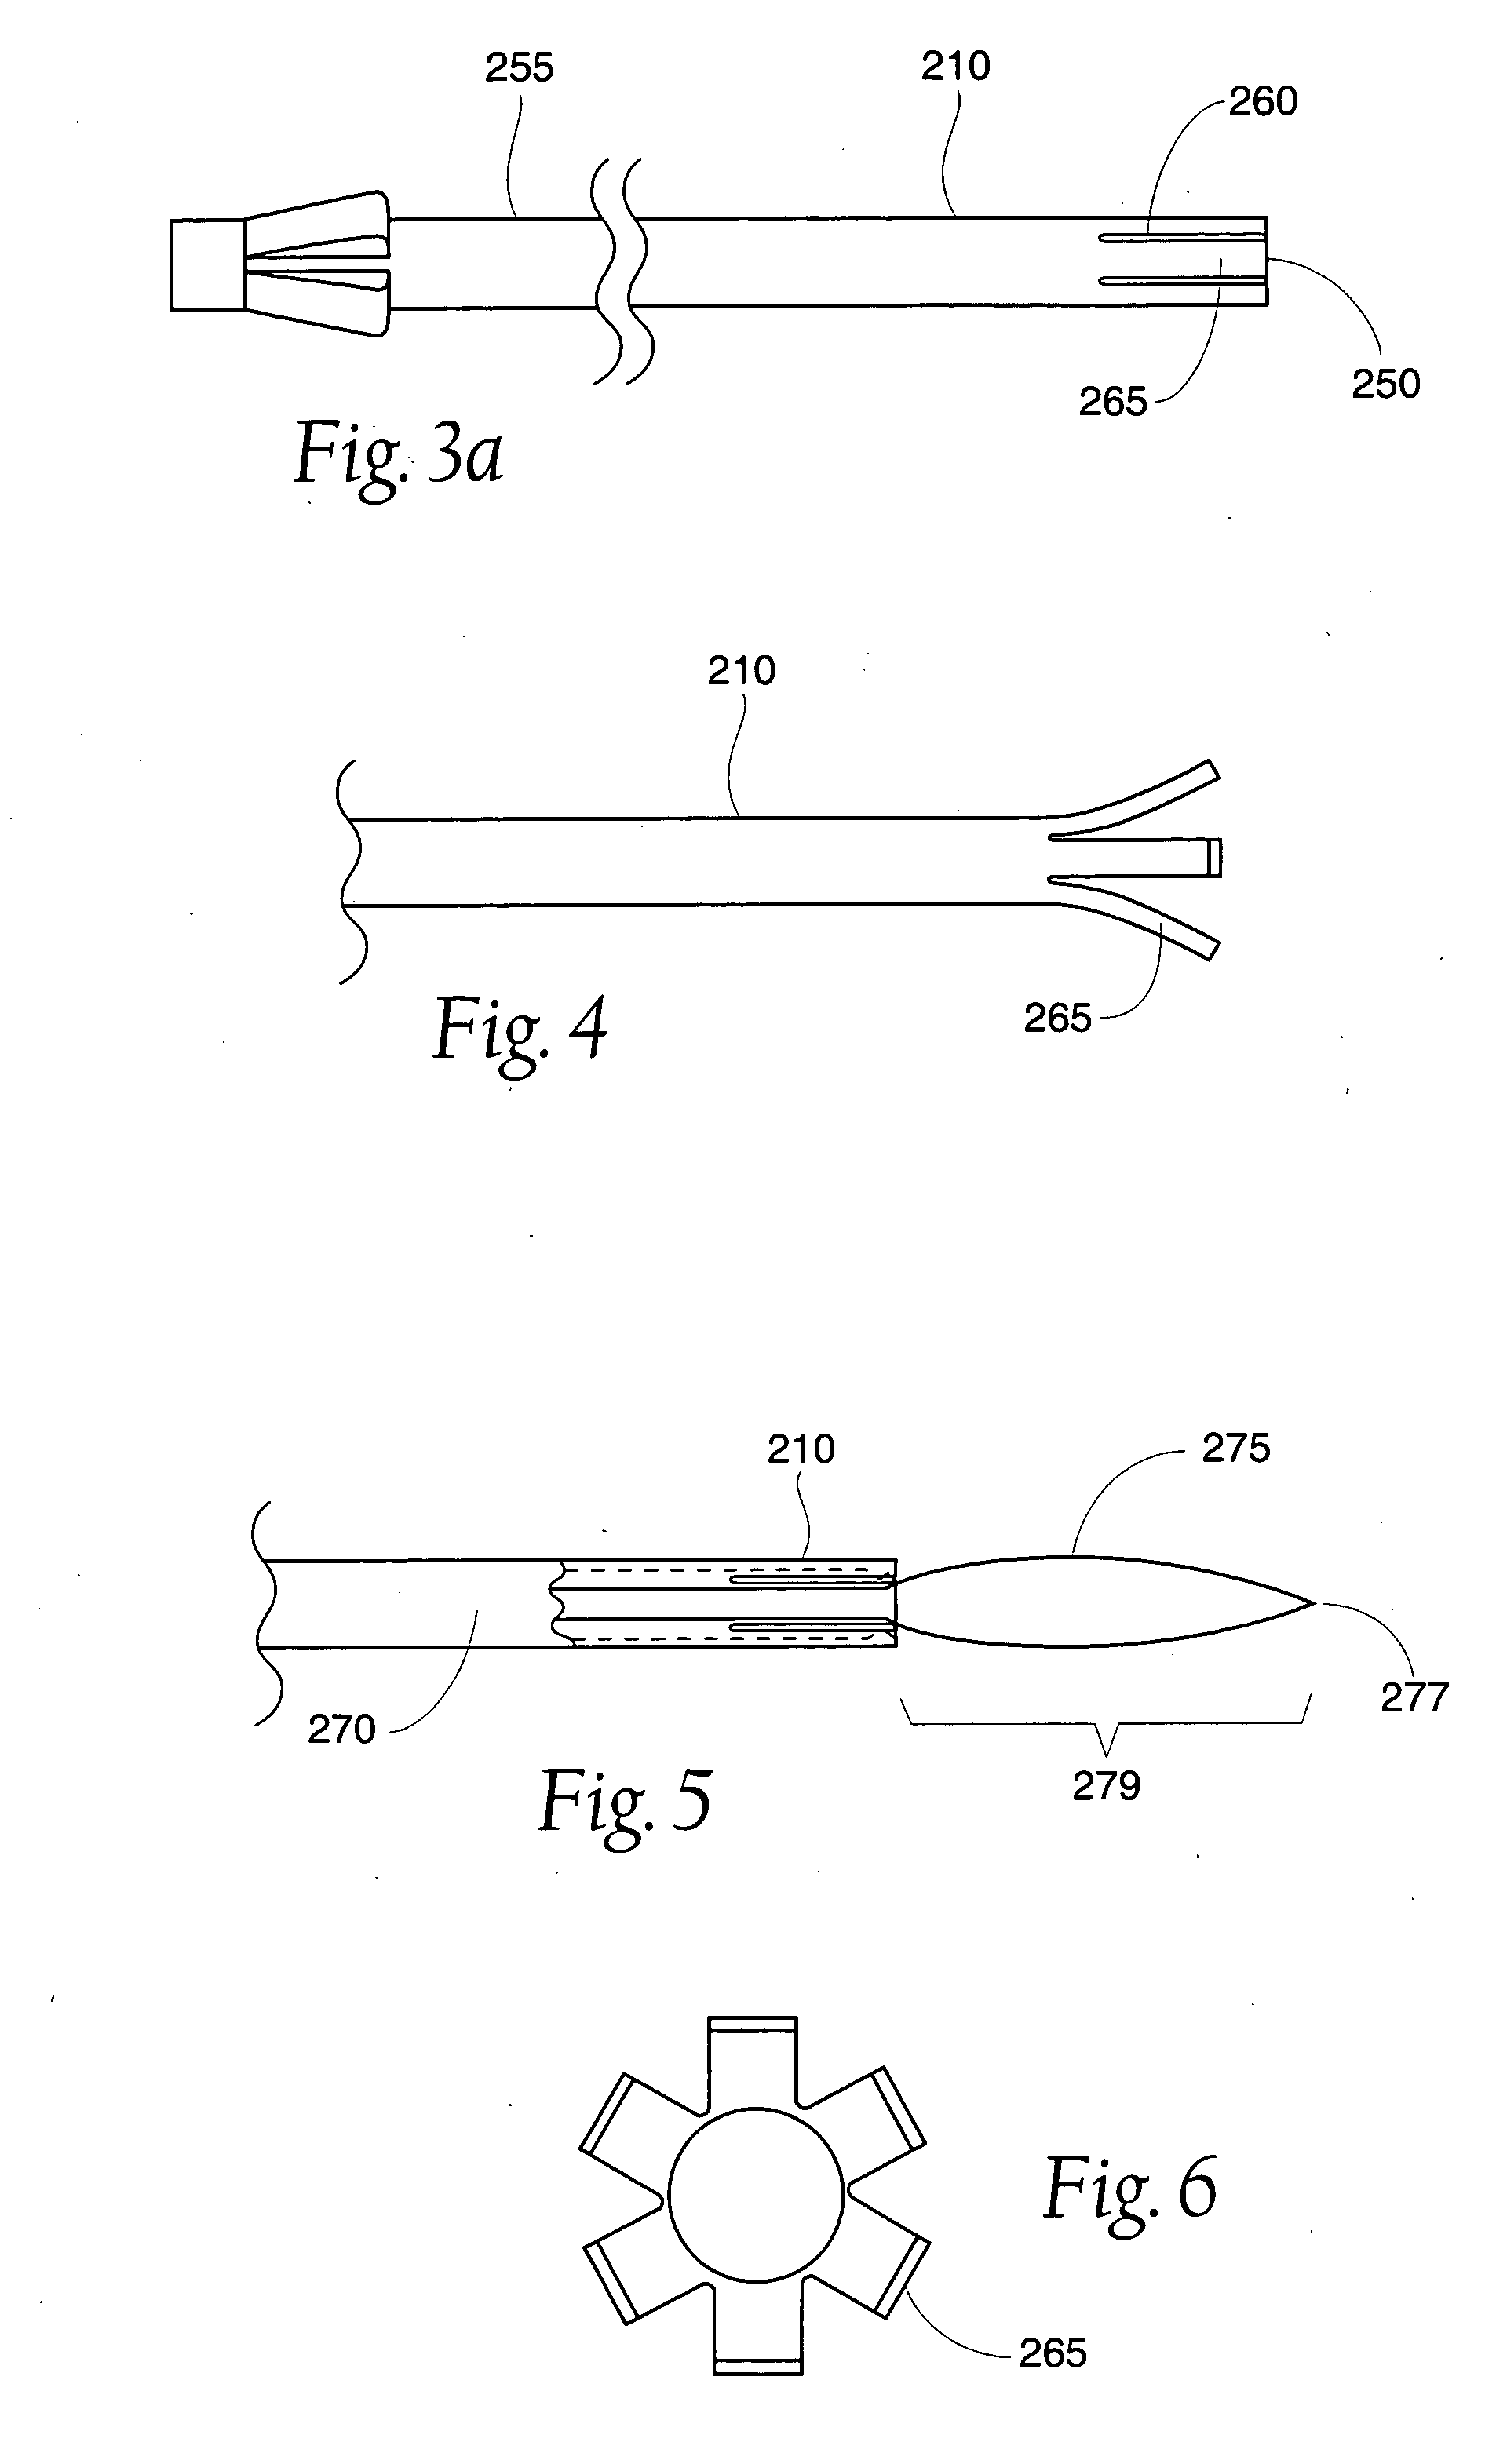 Insertion devices and method of use